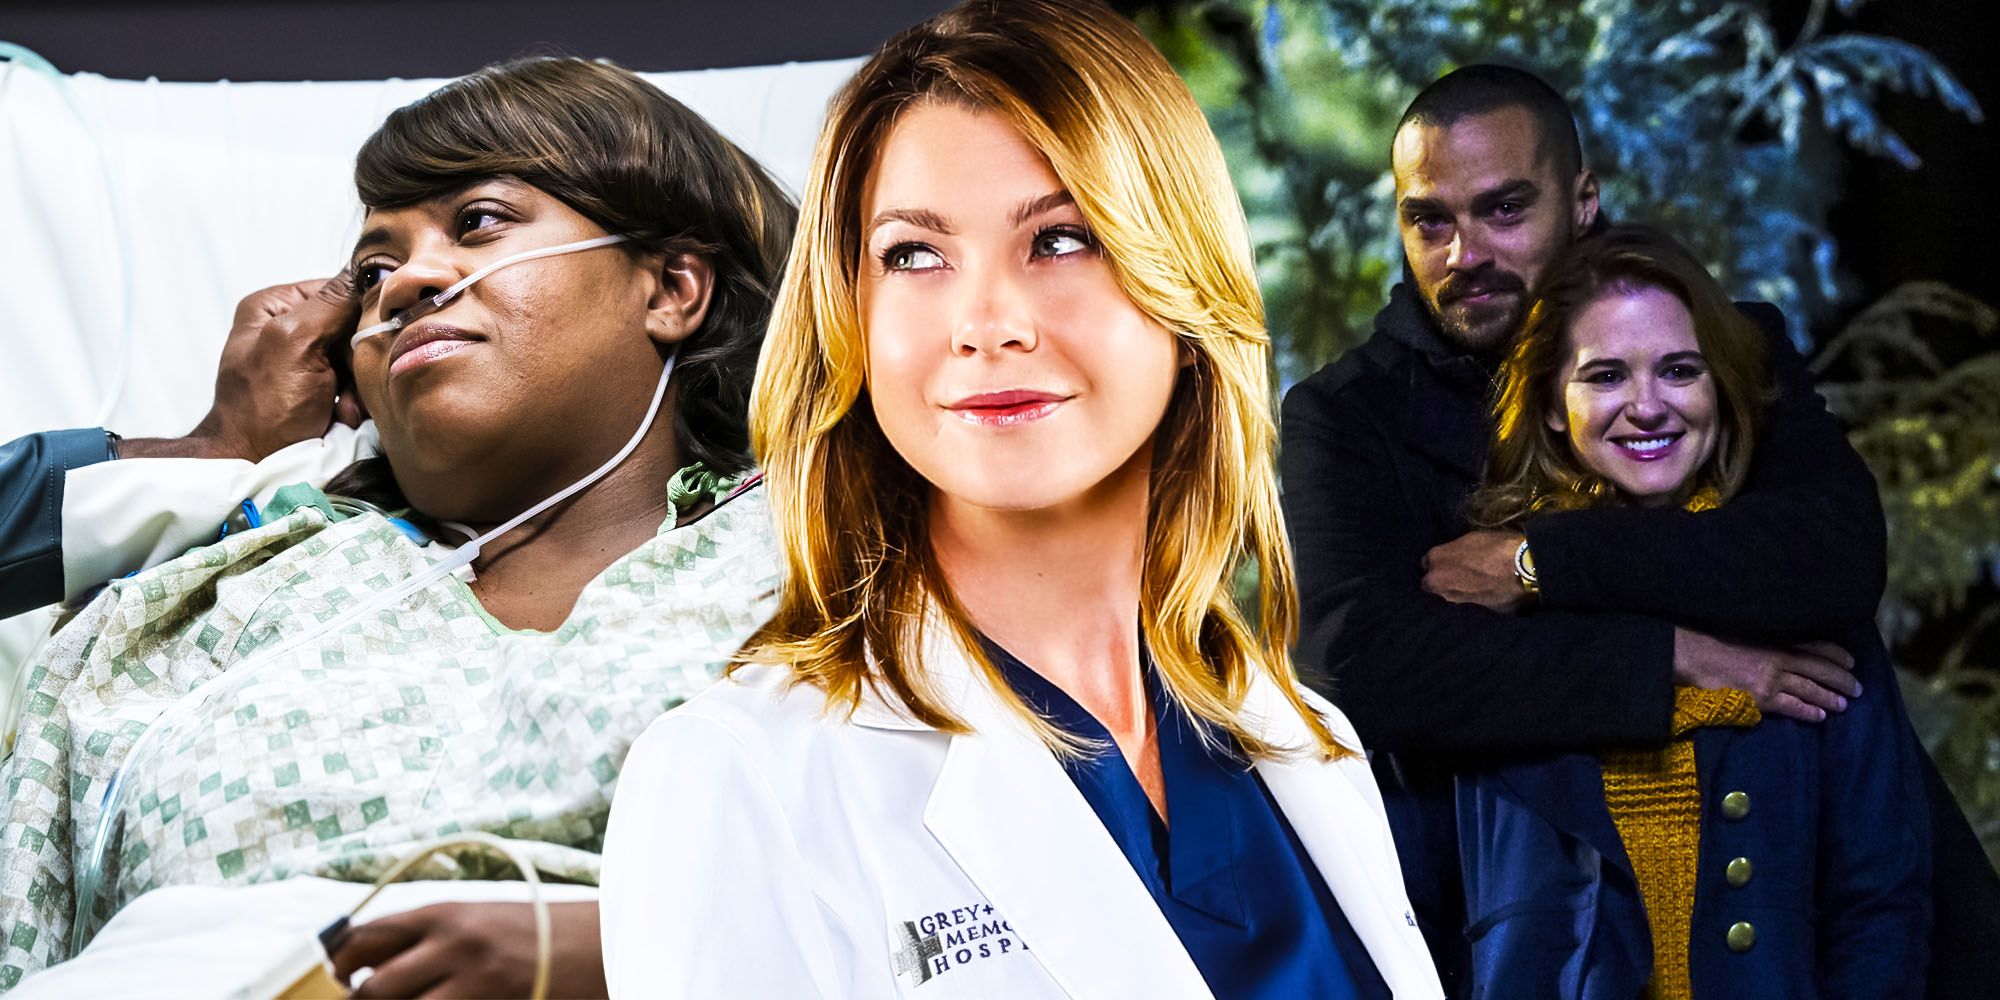 Only episodes of Greys anatomy that Ellen Pompeo was not in